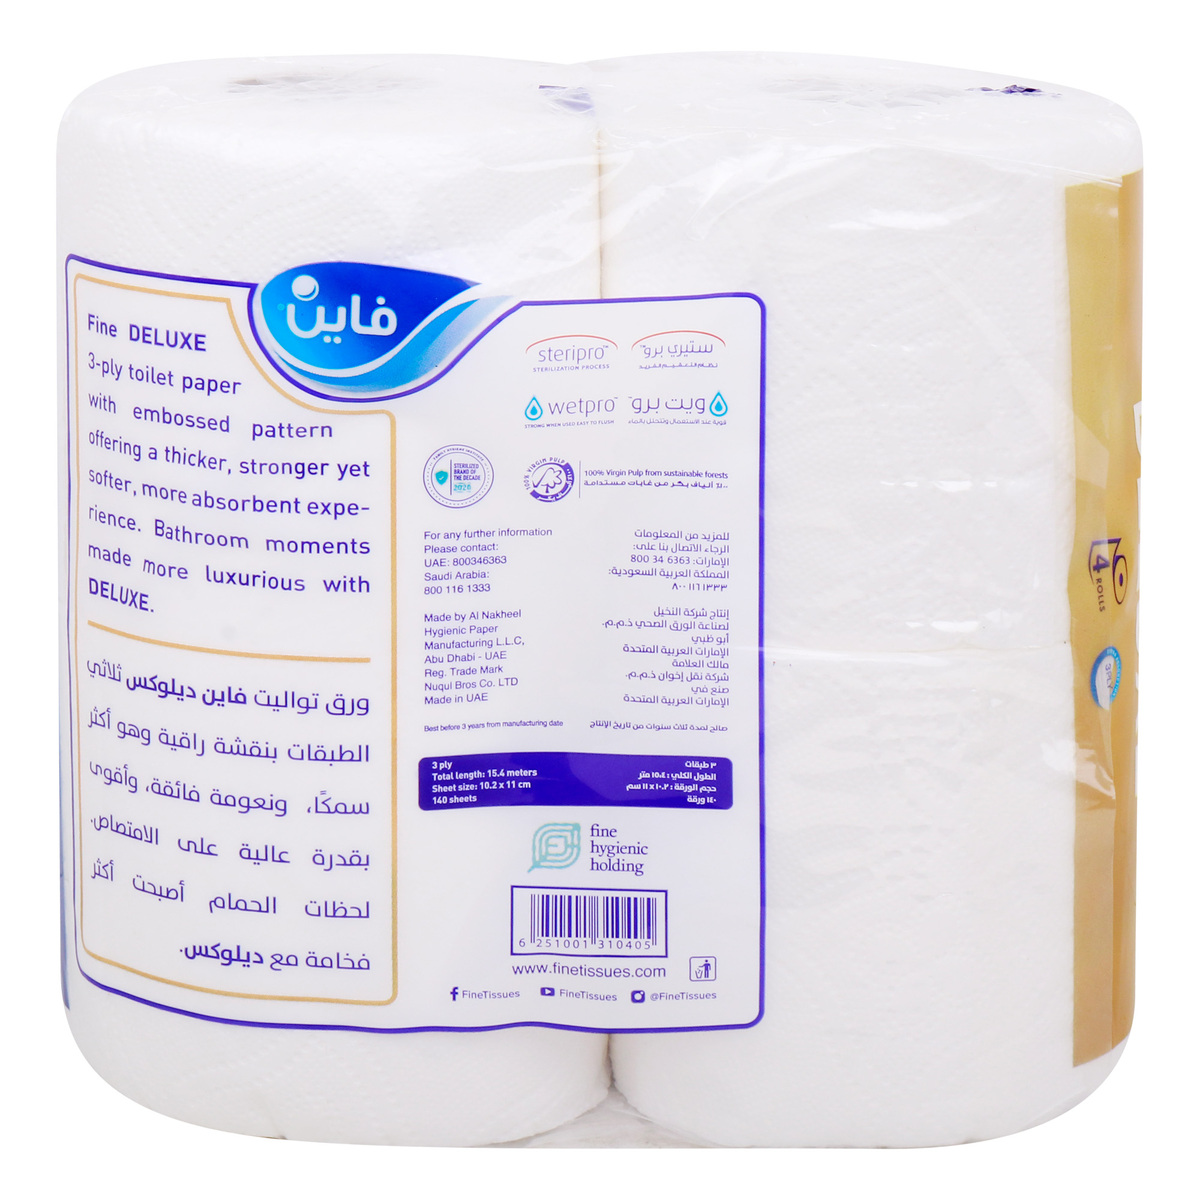 Fine Deluxe New & Improved Flushable Toilet Paper 3ply 4 Rolls